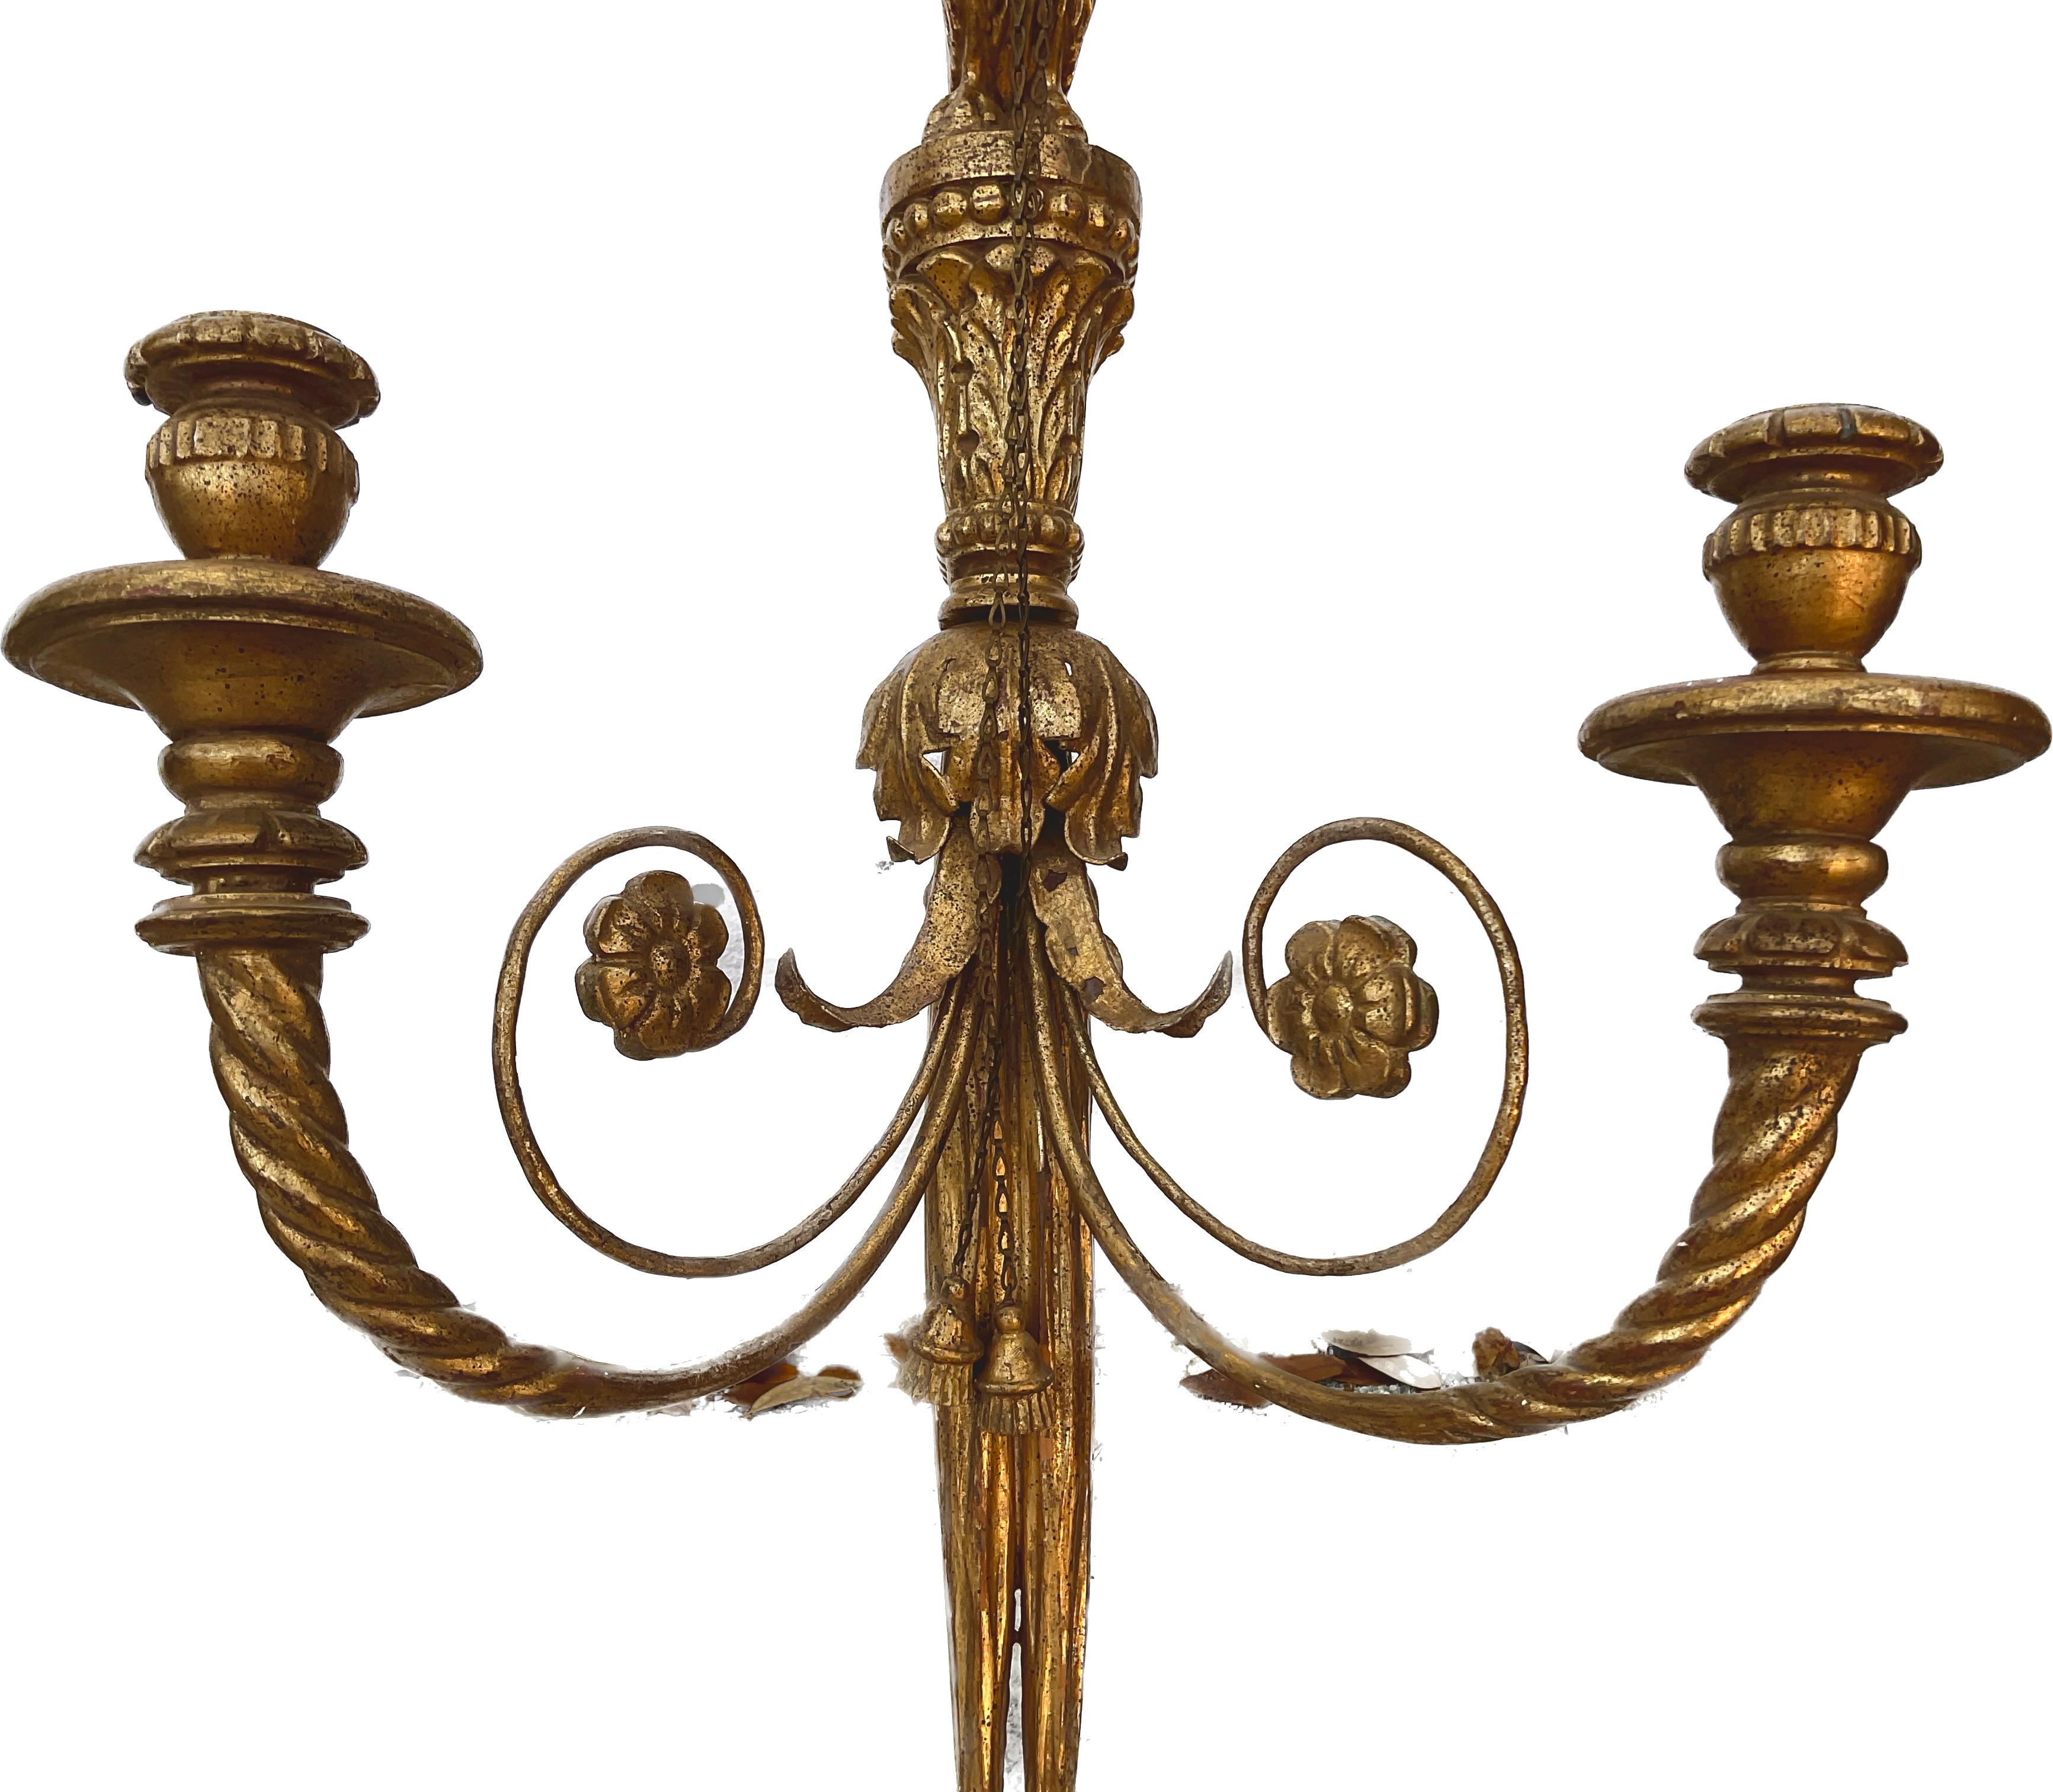 Pair of early 20th century Italian gilt carved wood wall sconces. Each has two arms for candles and a winged eagle, crested with gilded bows.